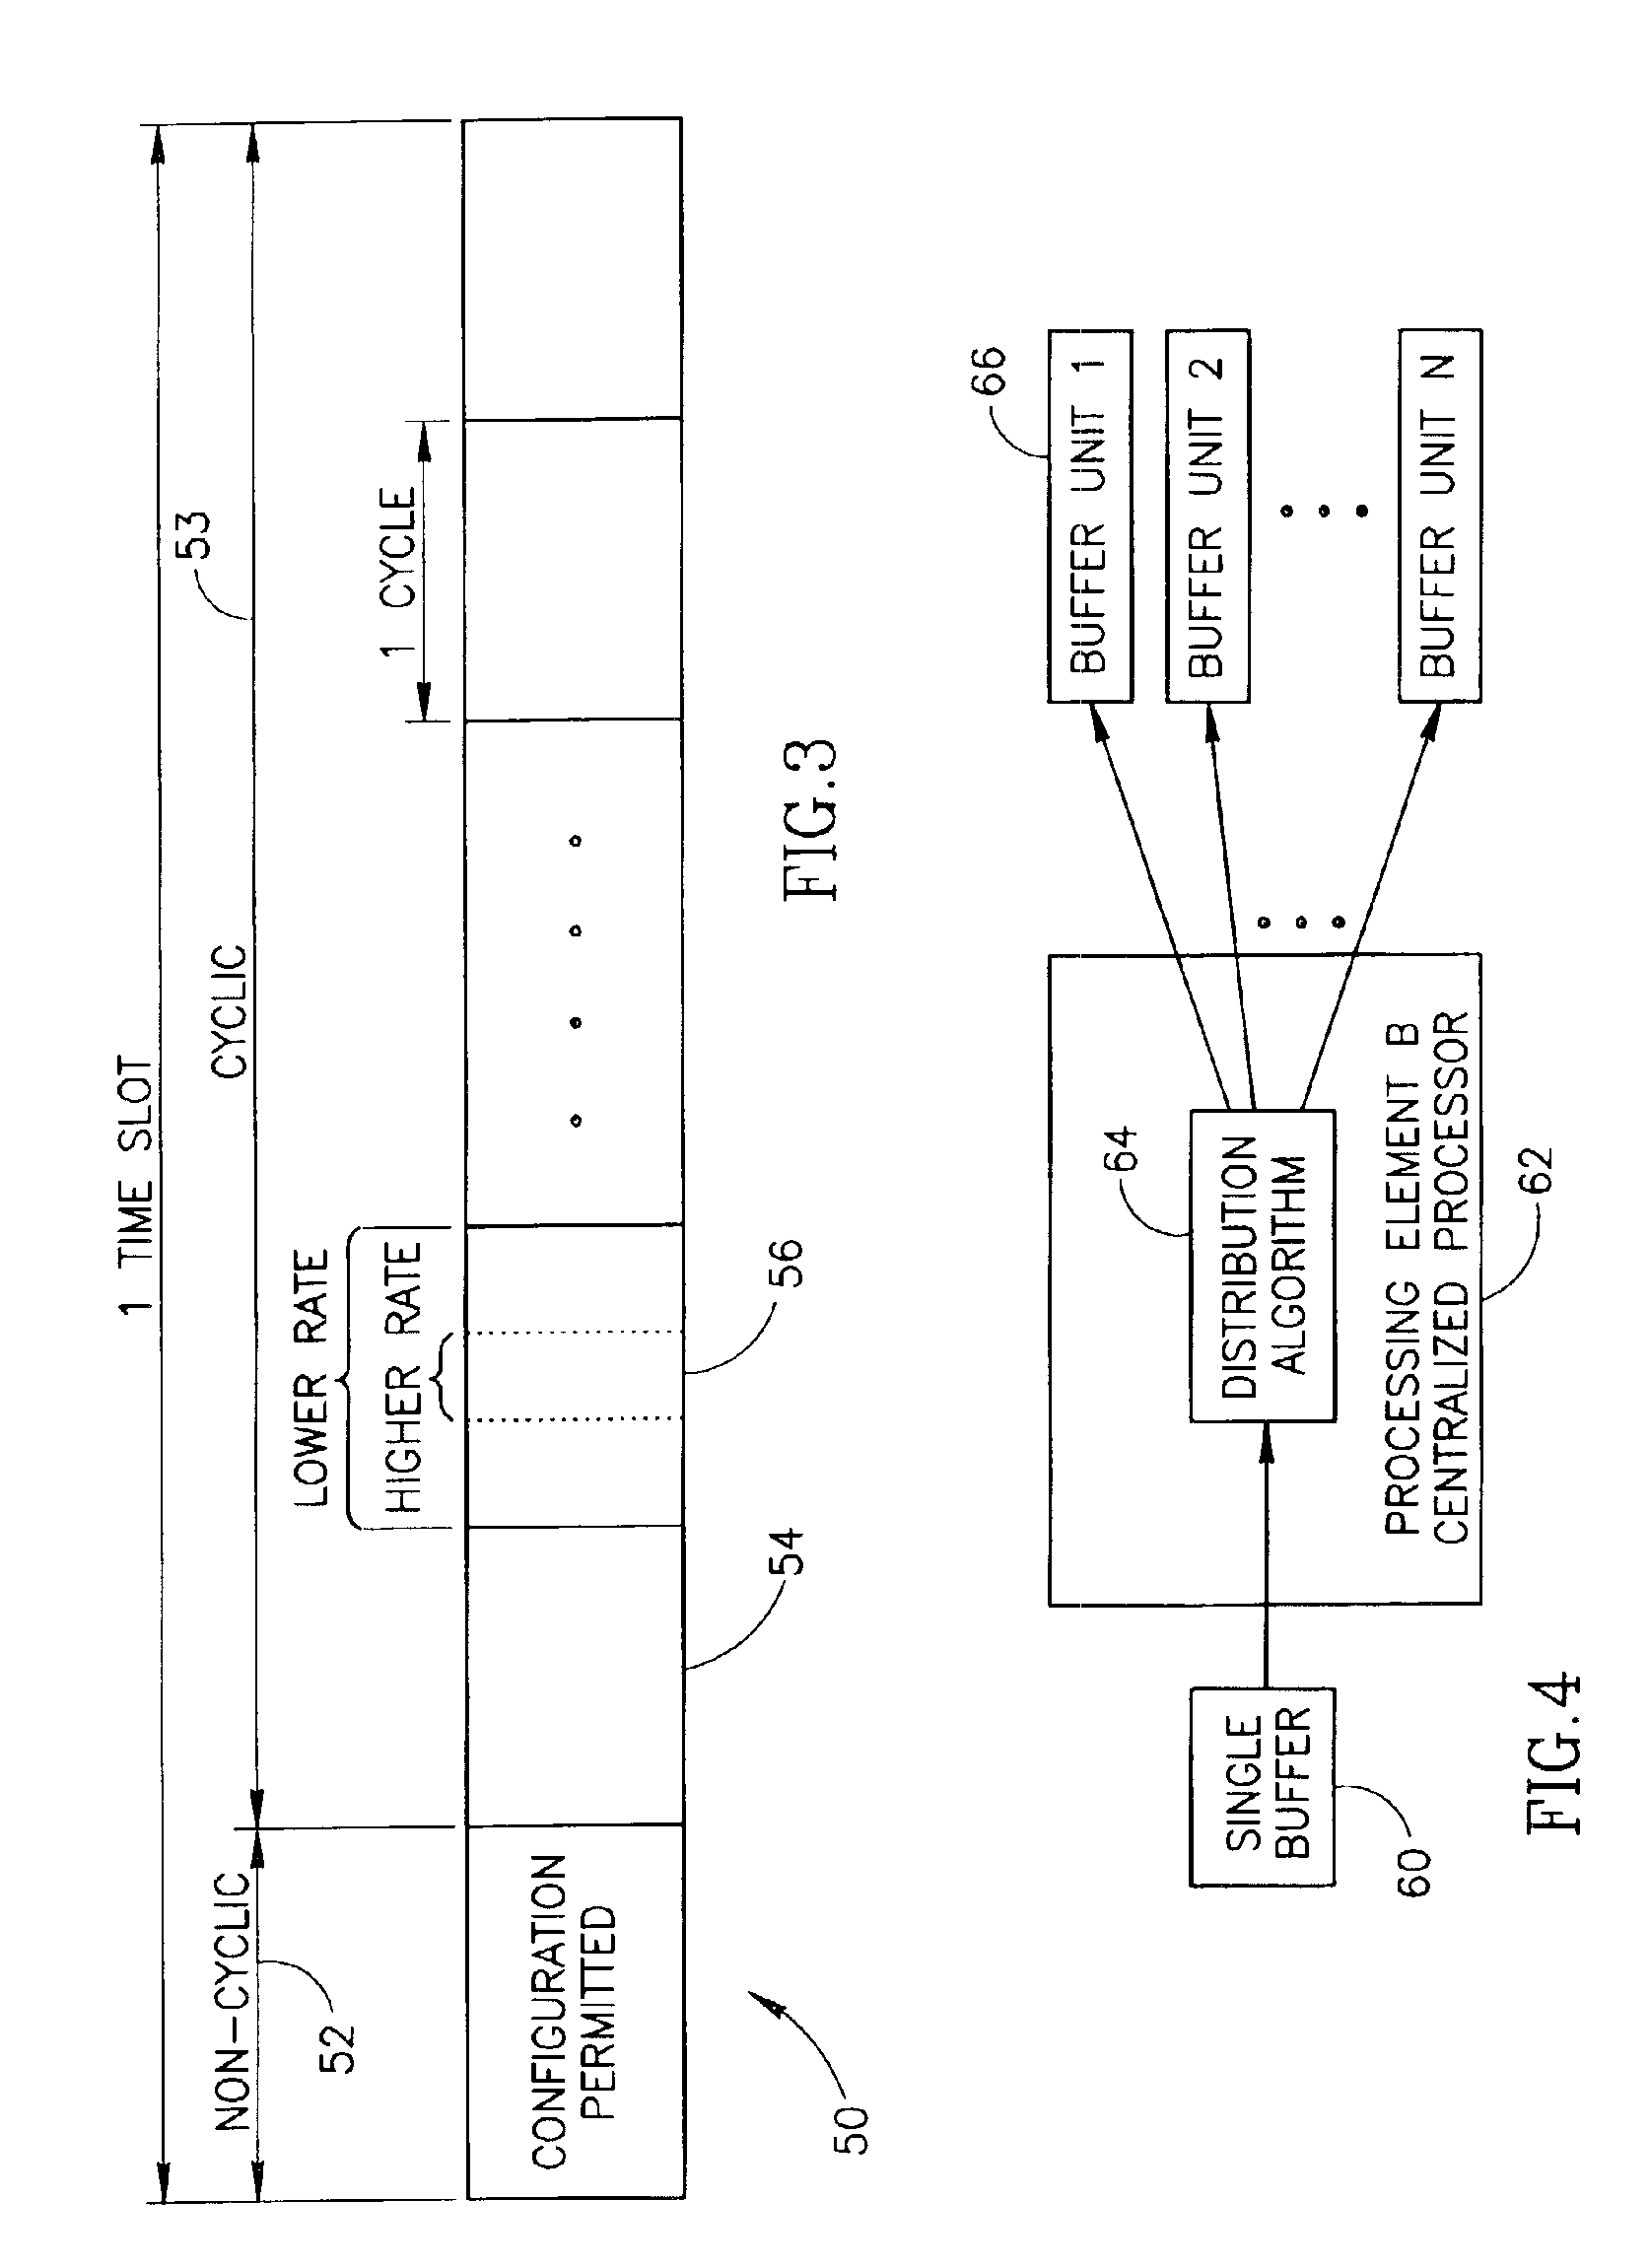 Data transfer scheme in a communications system incorporating multiple processing elements